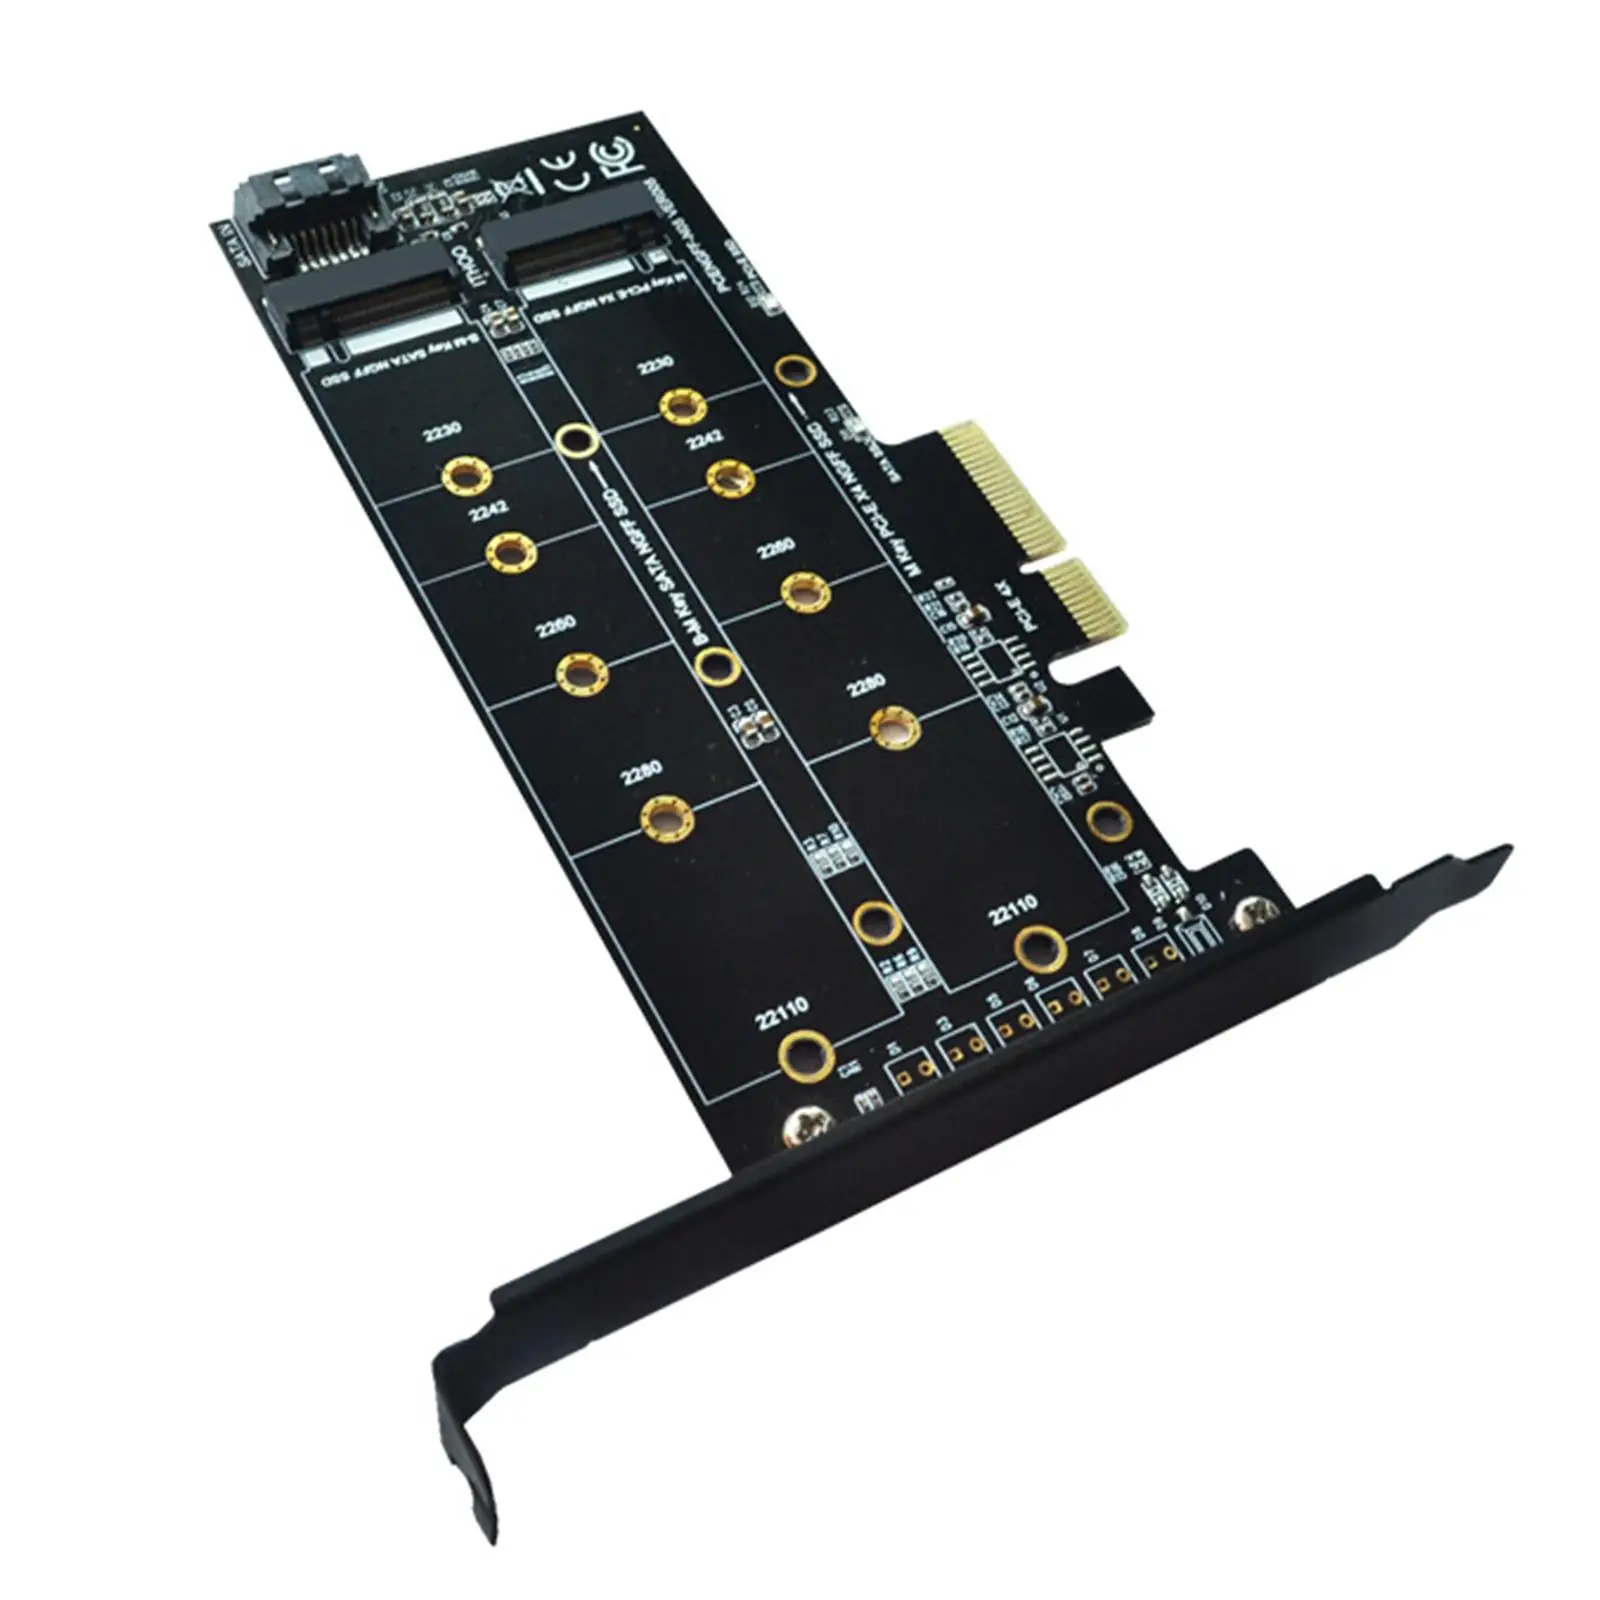 Dual M.2 PCIe Adapter Card Direct Replaces Easy Installation PCI E Riser Card B Key M Key Expansion Dual Interface M.2 to SATA